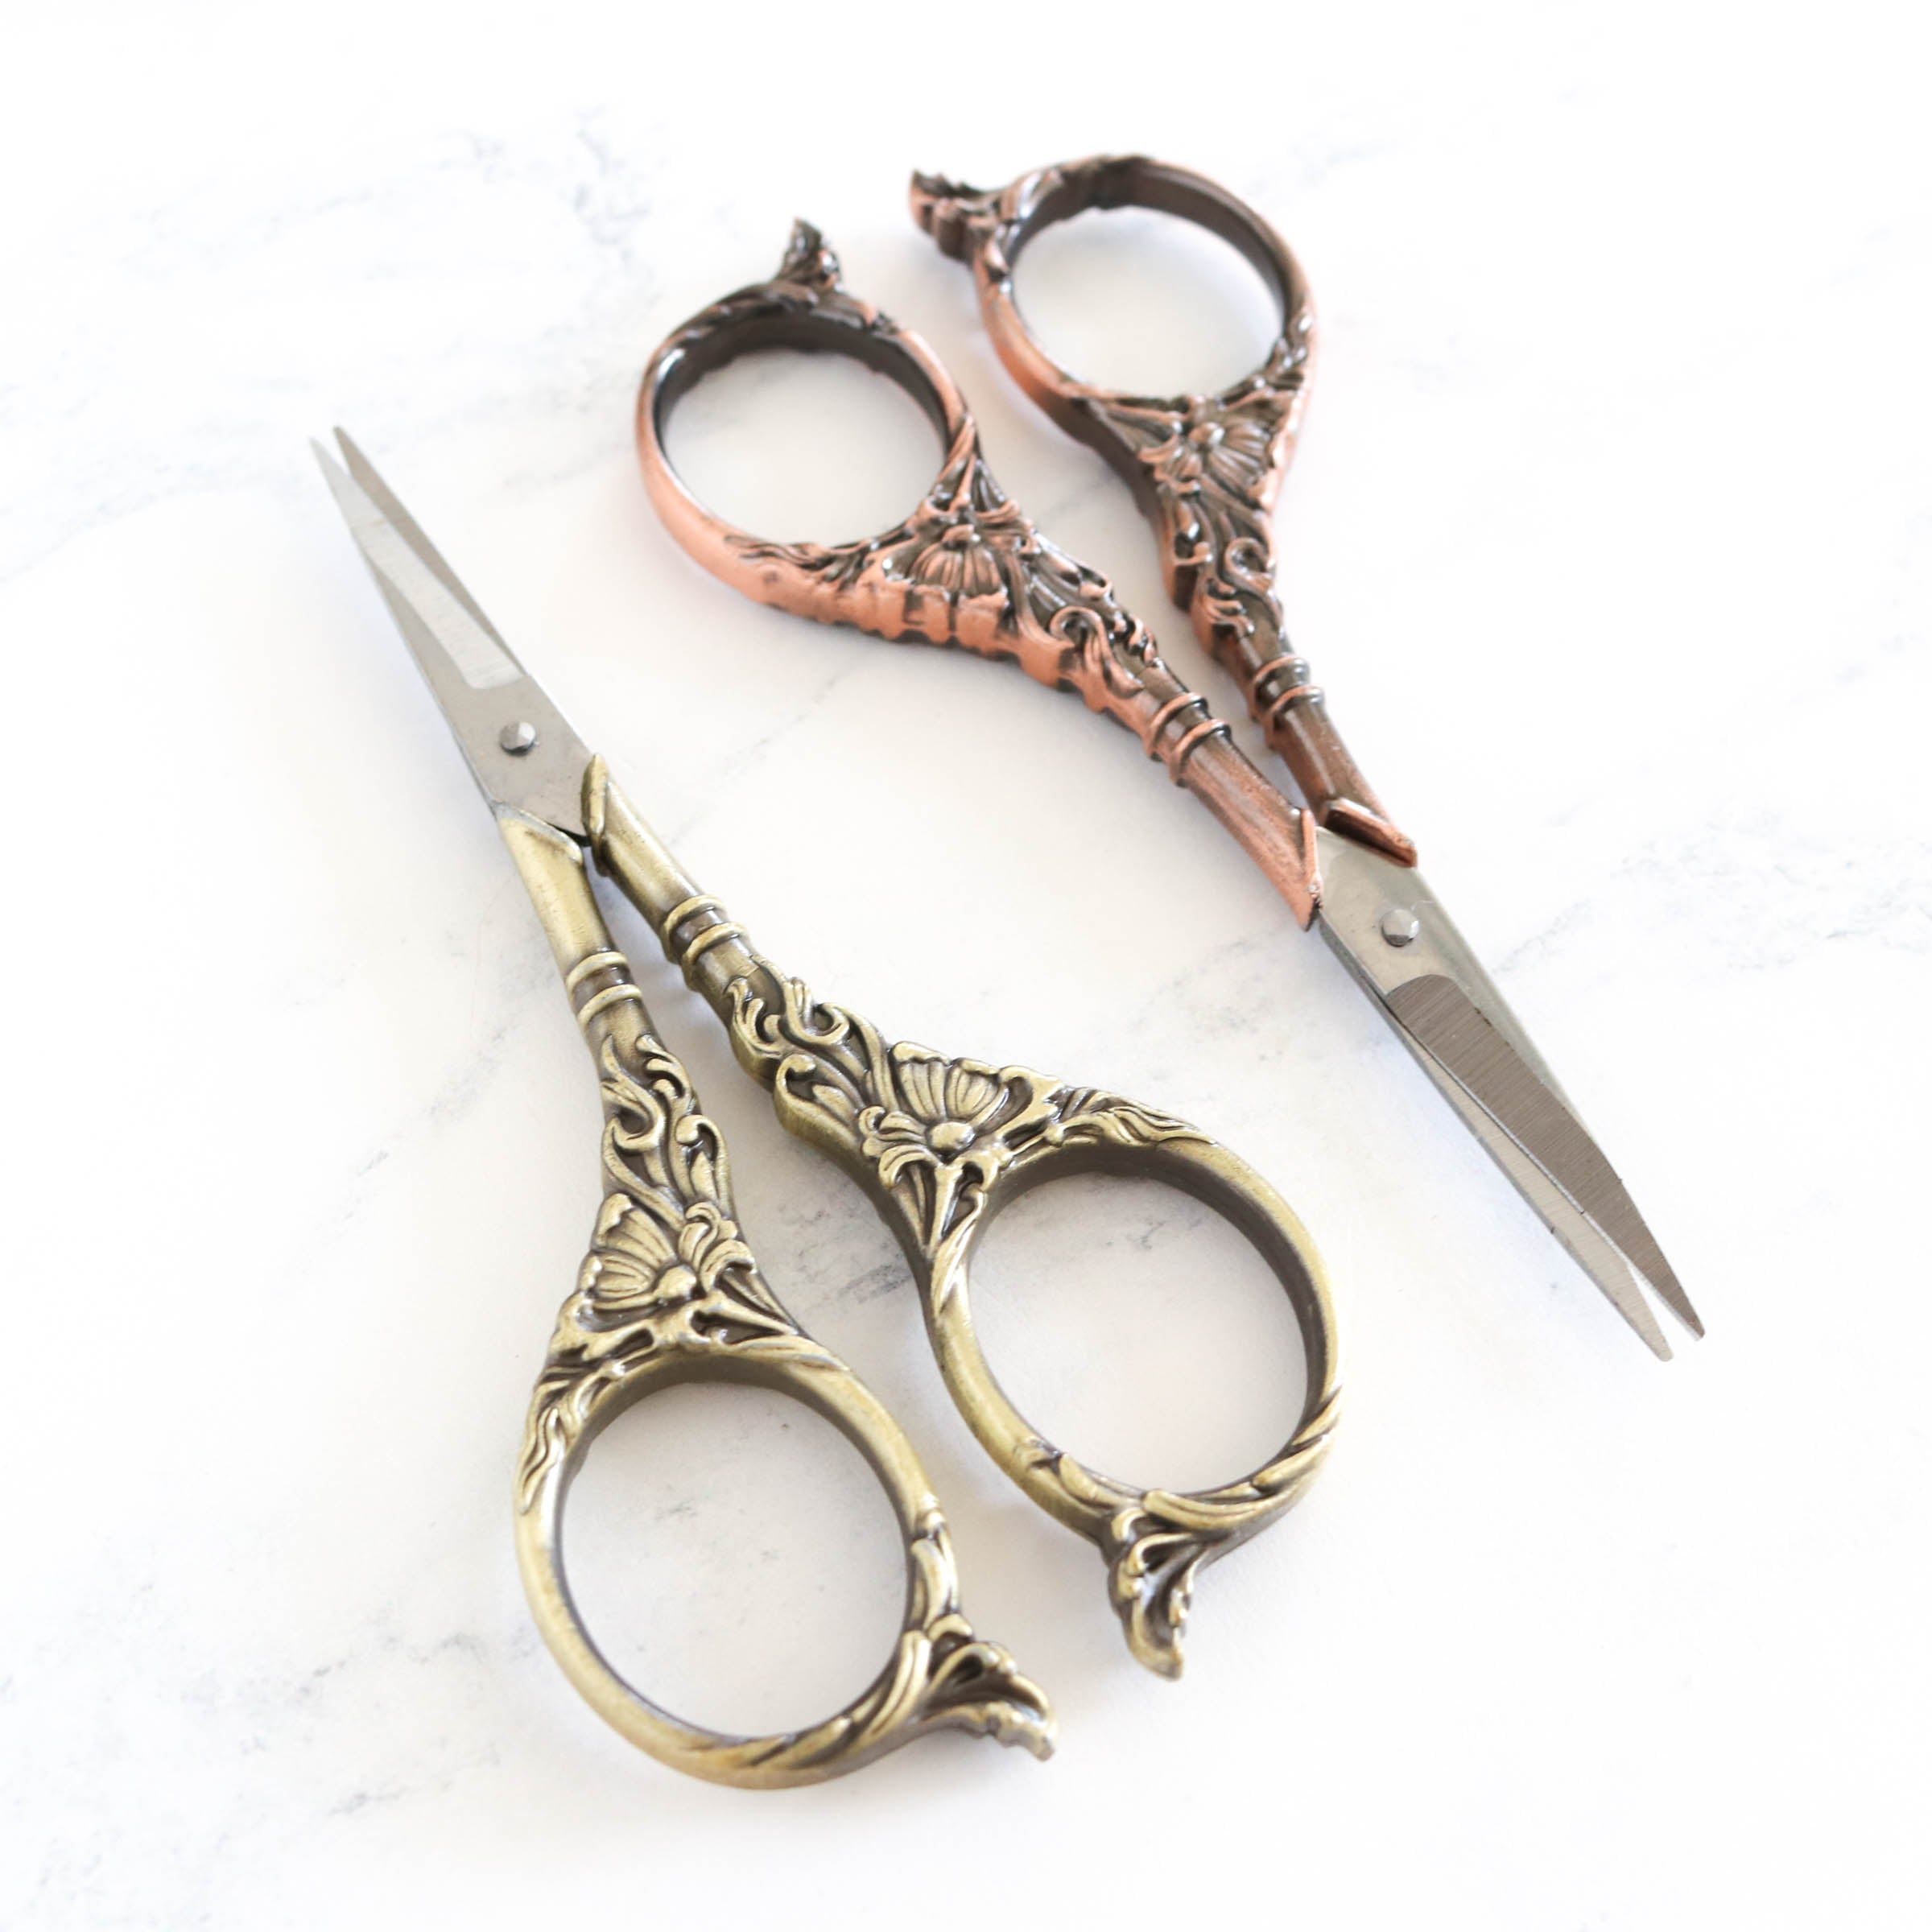 Left-handed embroidery scissors - Stitched Modern